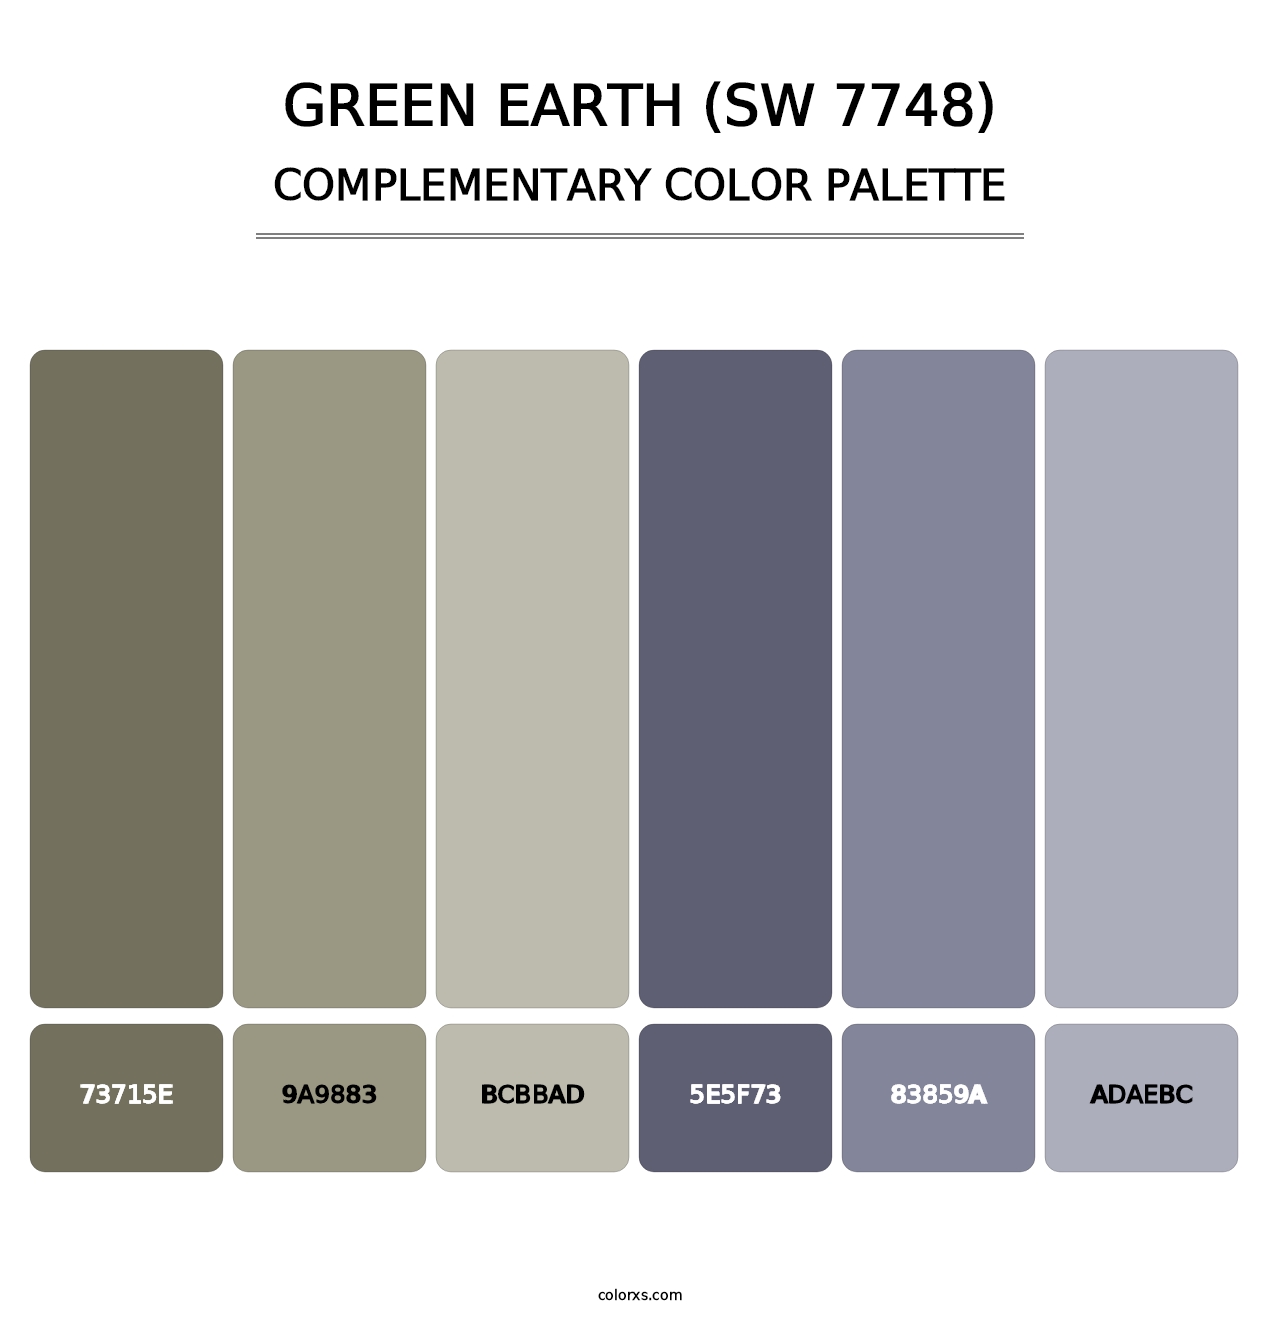 Green Earth (SW 7748) - Complementary Color Palette